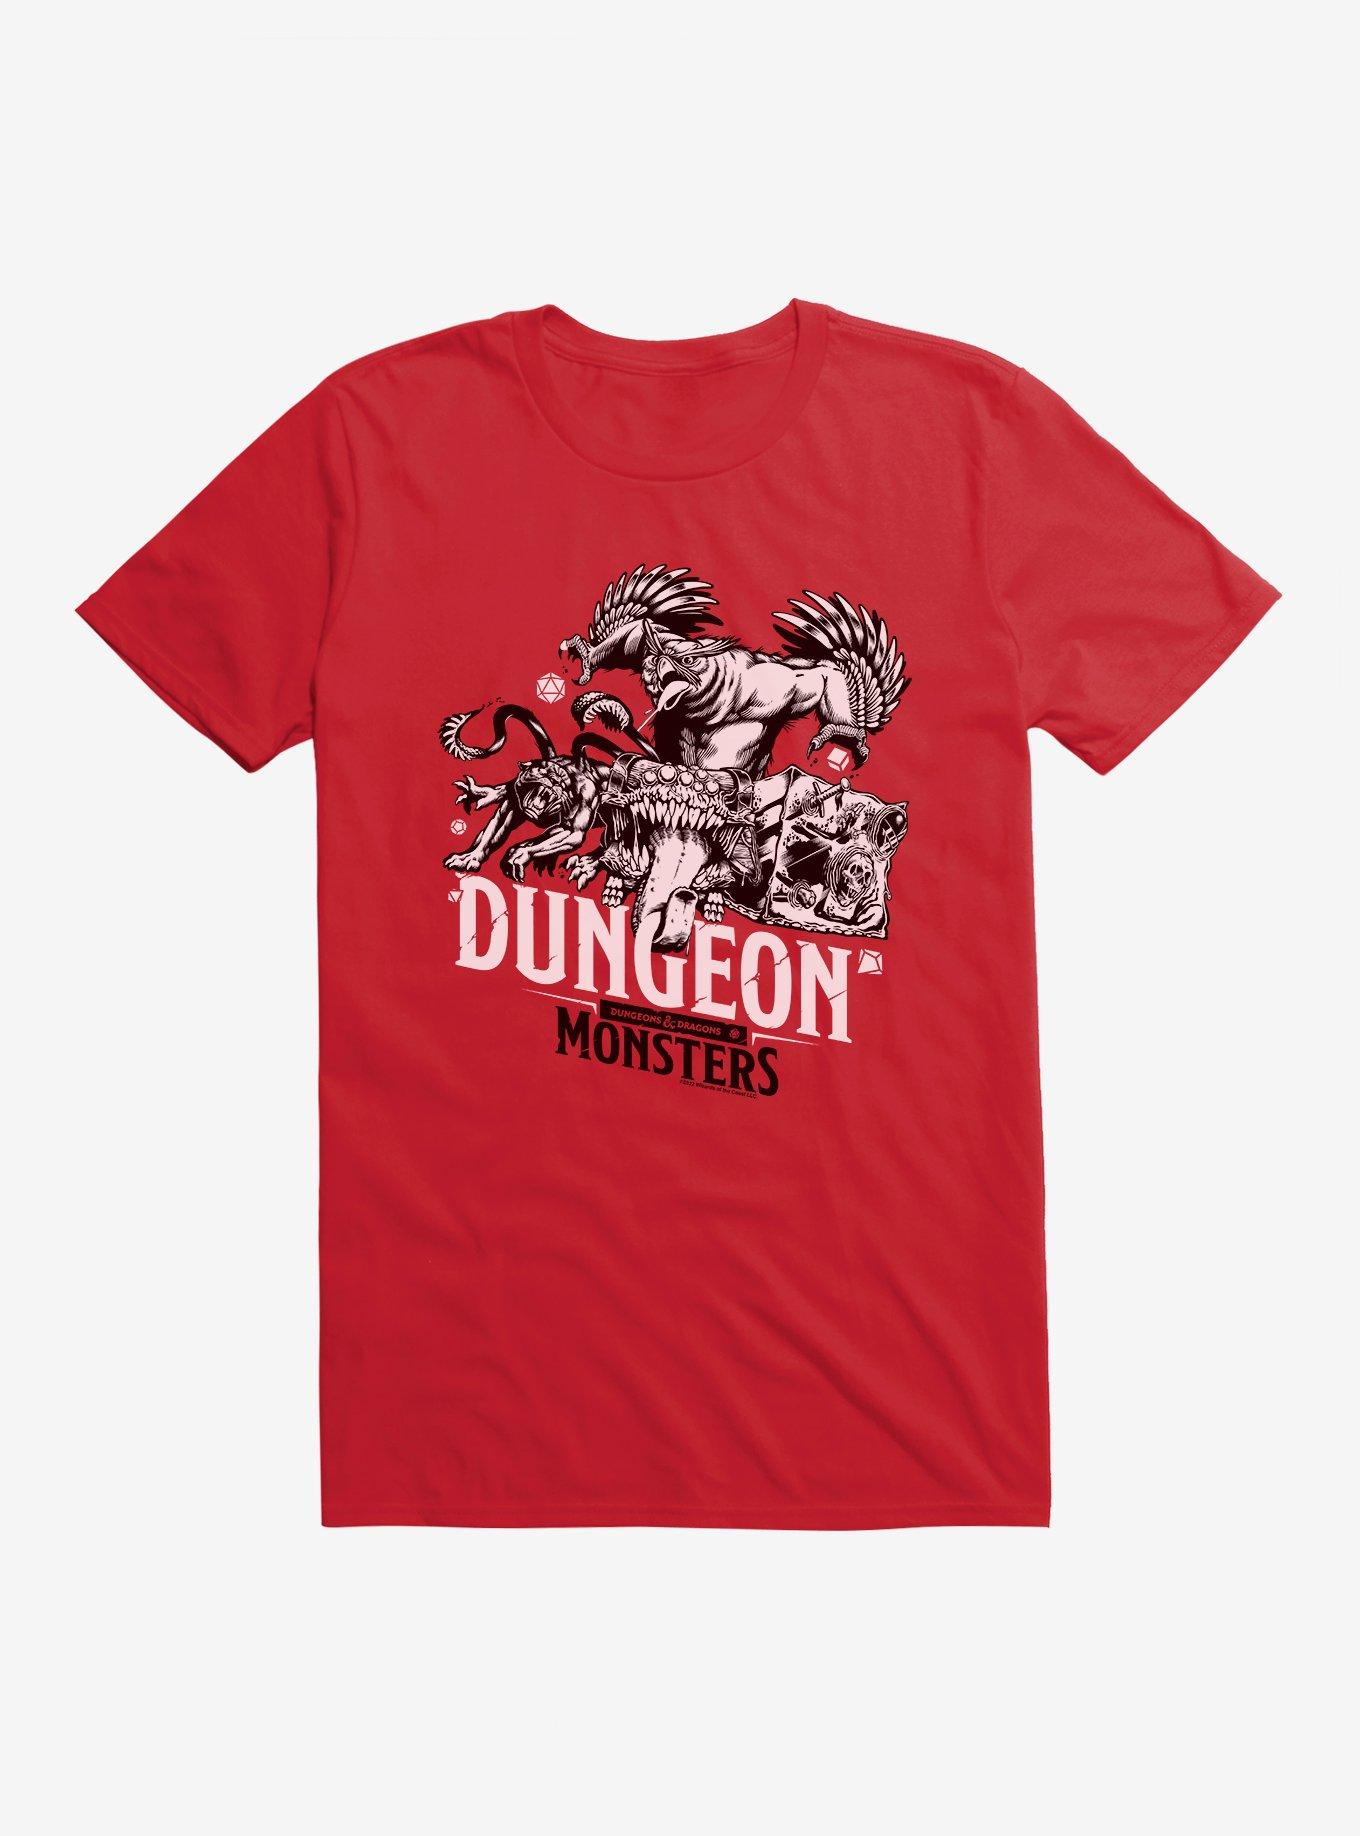 Dungeons & Dragons Monsters Group T-Shirt, RED, hi-res